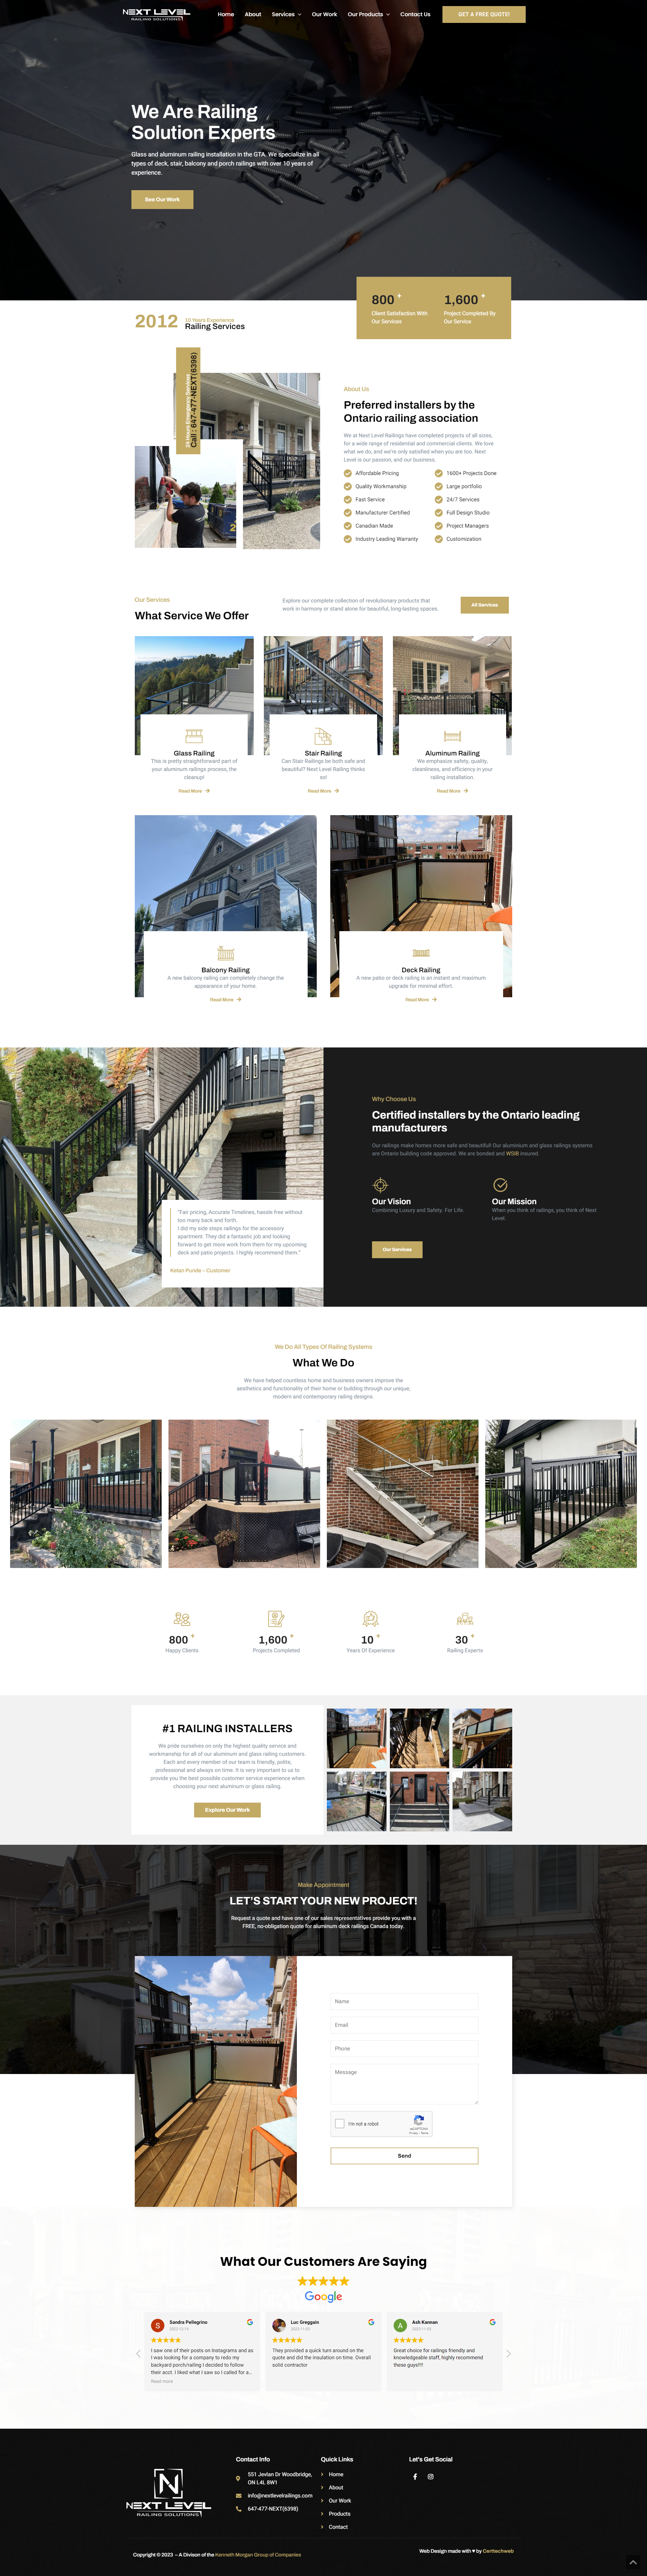 A website design for a construction company specializing in Next Level Railing Solution.